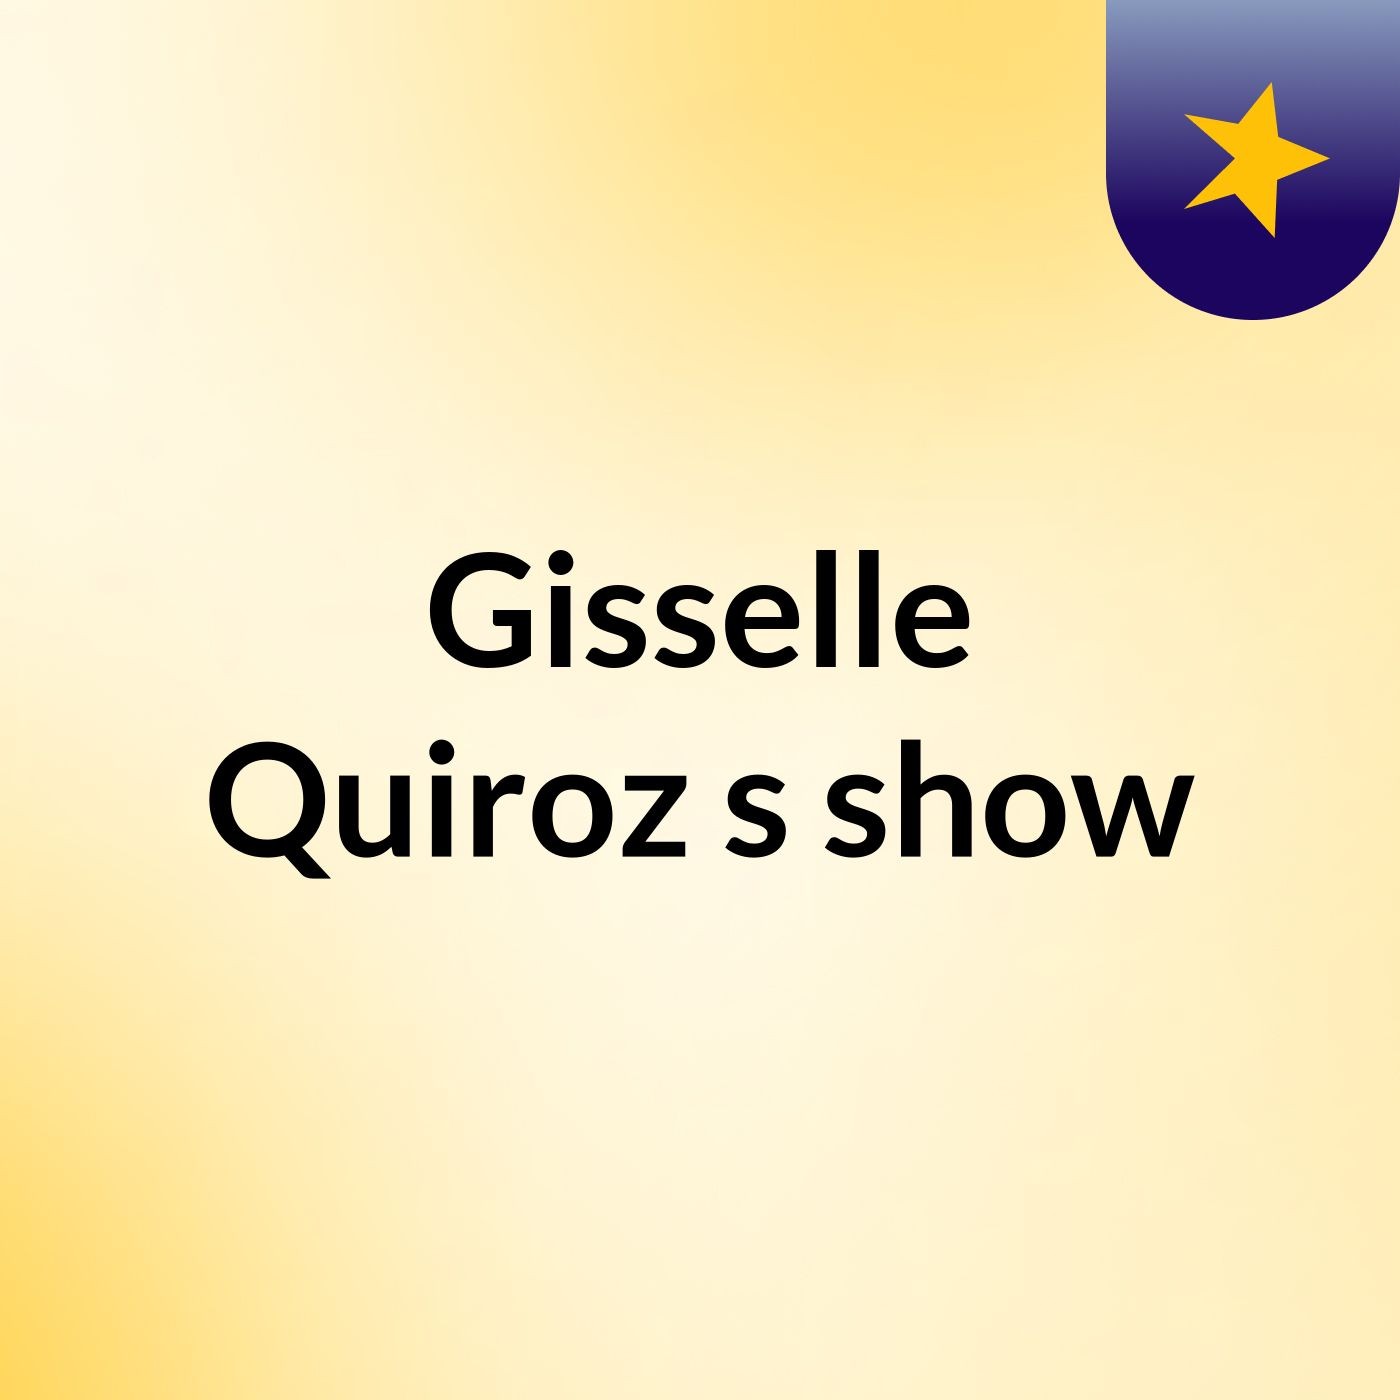 Gisselle Quiroz's show